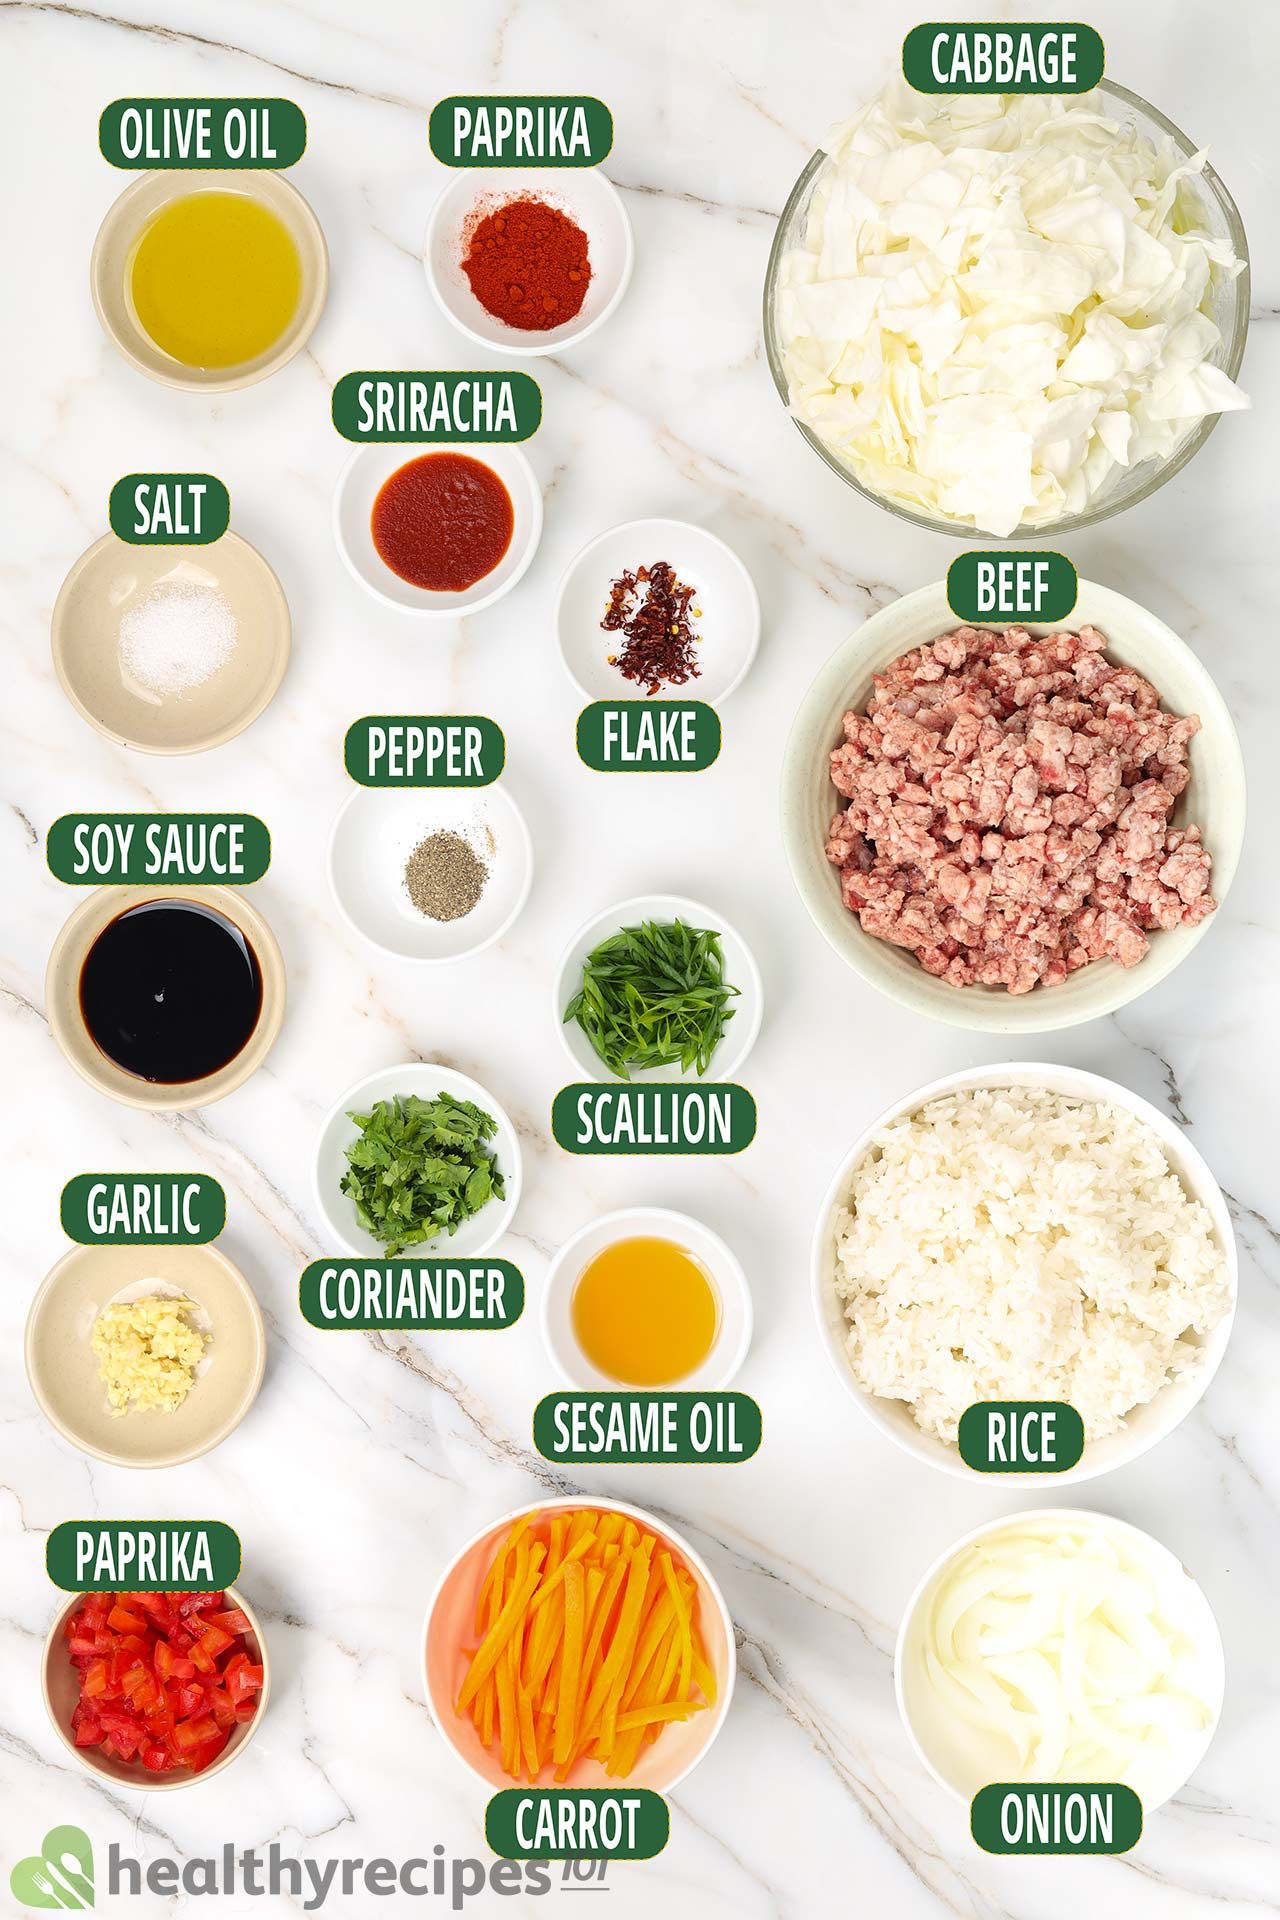 Ingredients for Ground Beef and Cabbage